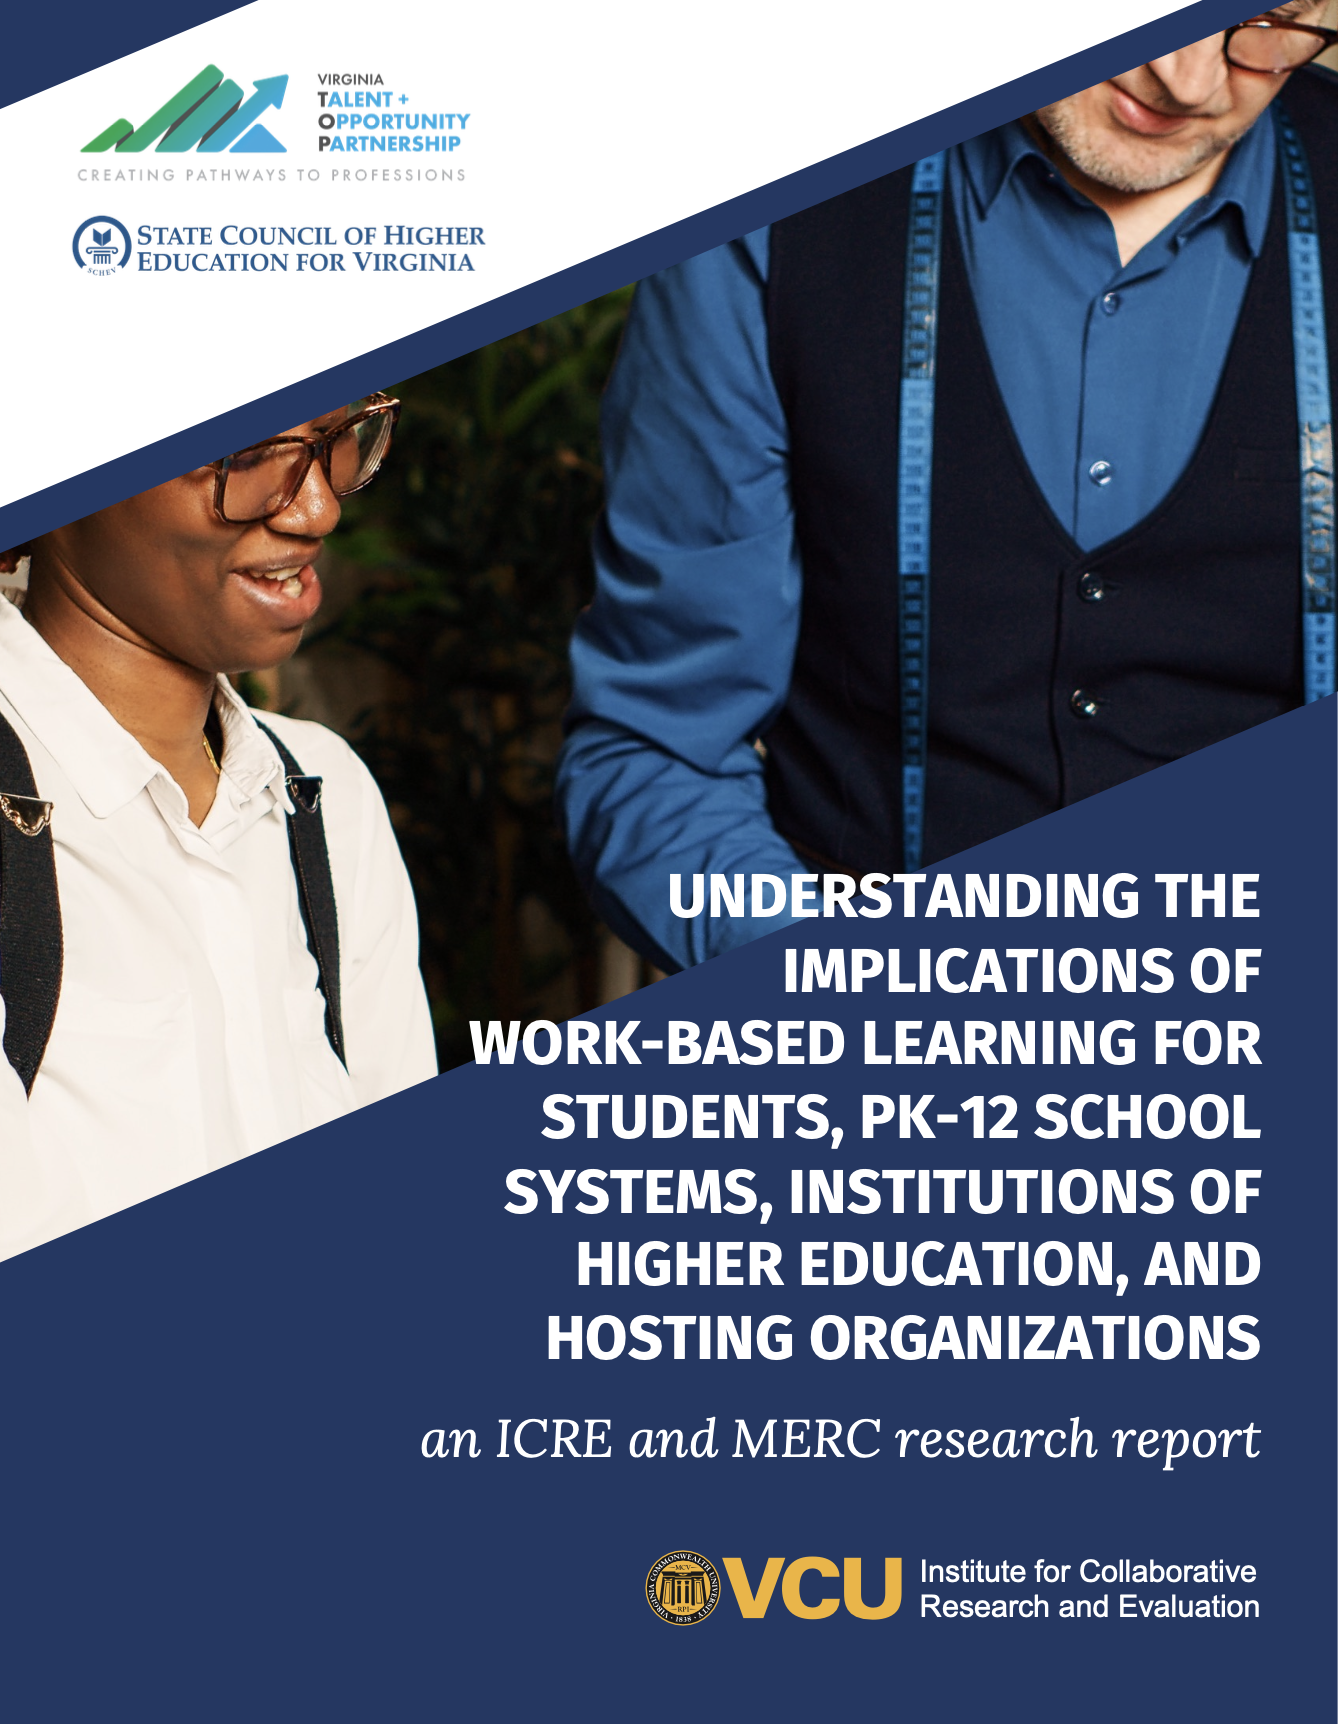 A cover of a research report focused on work-based learning